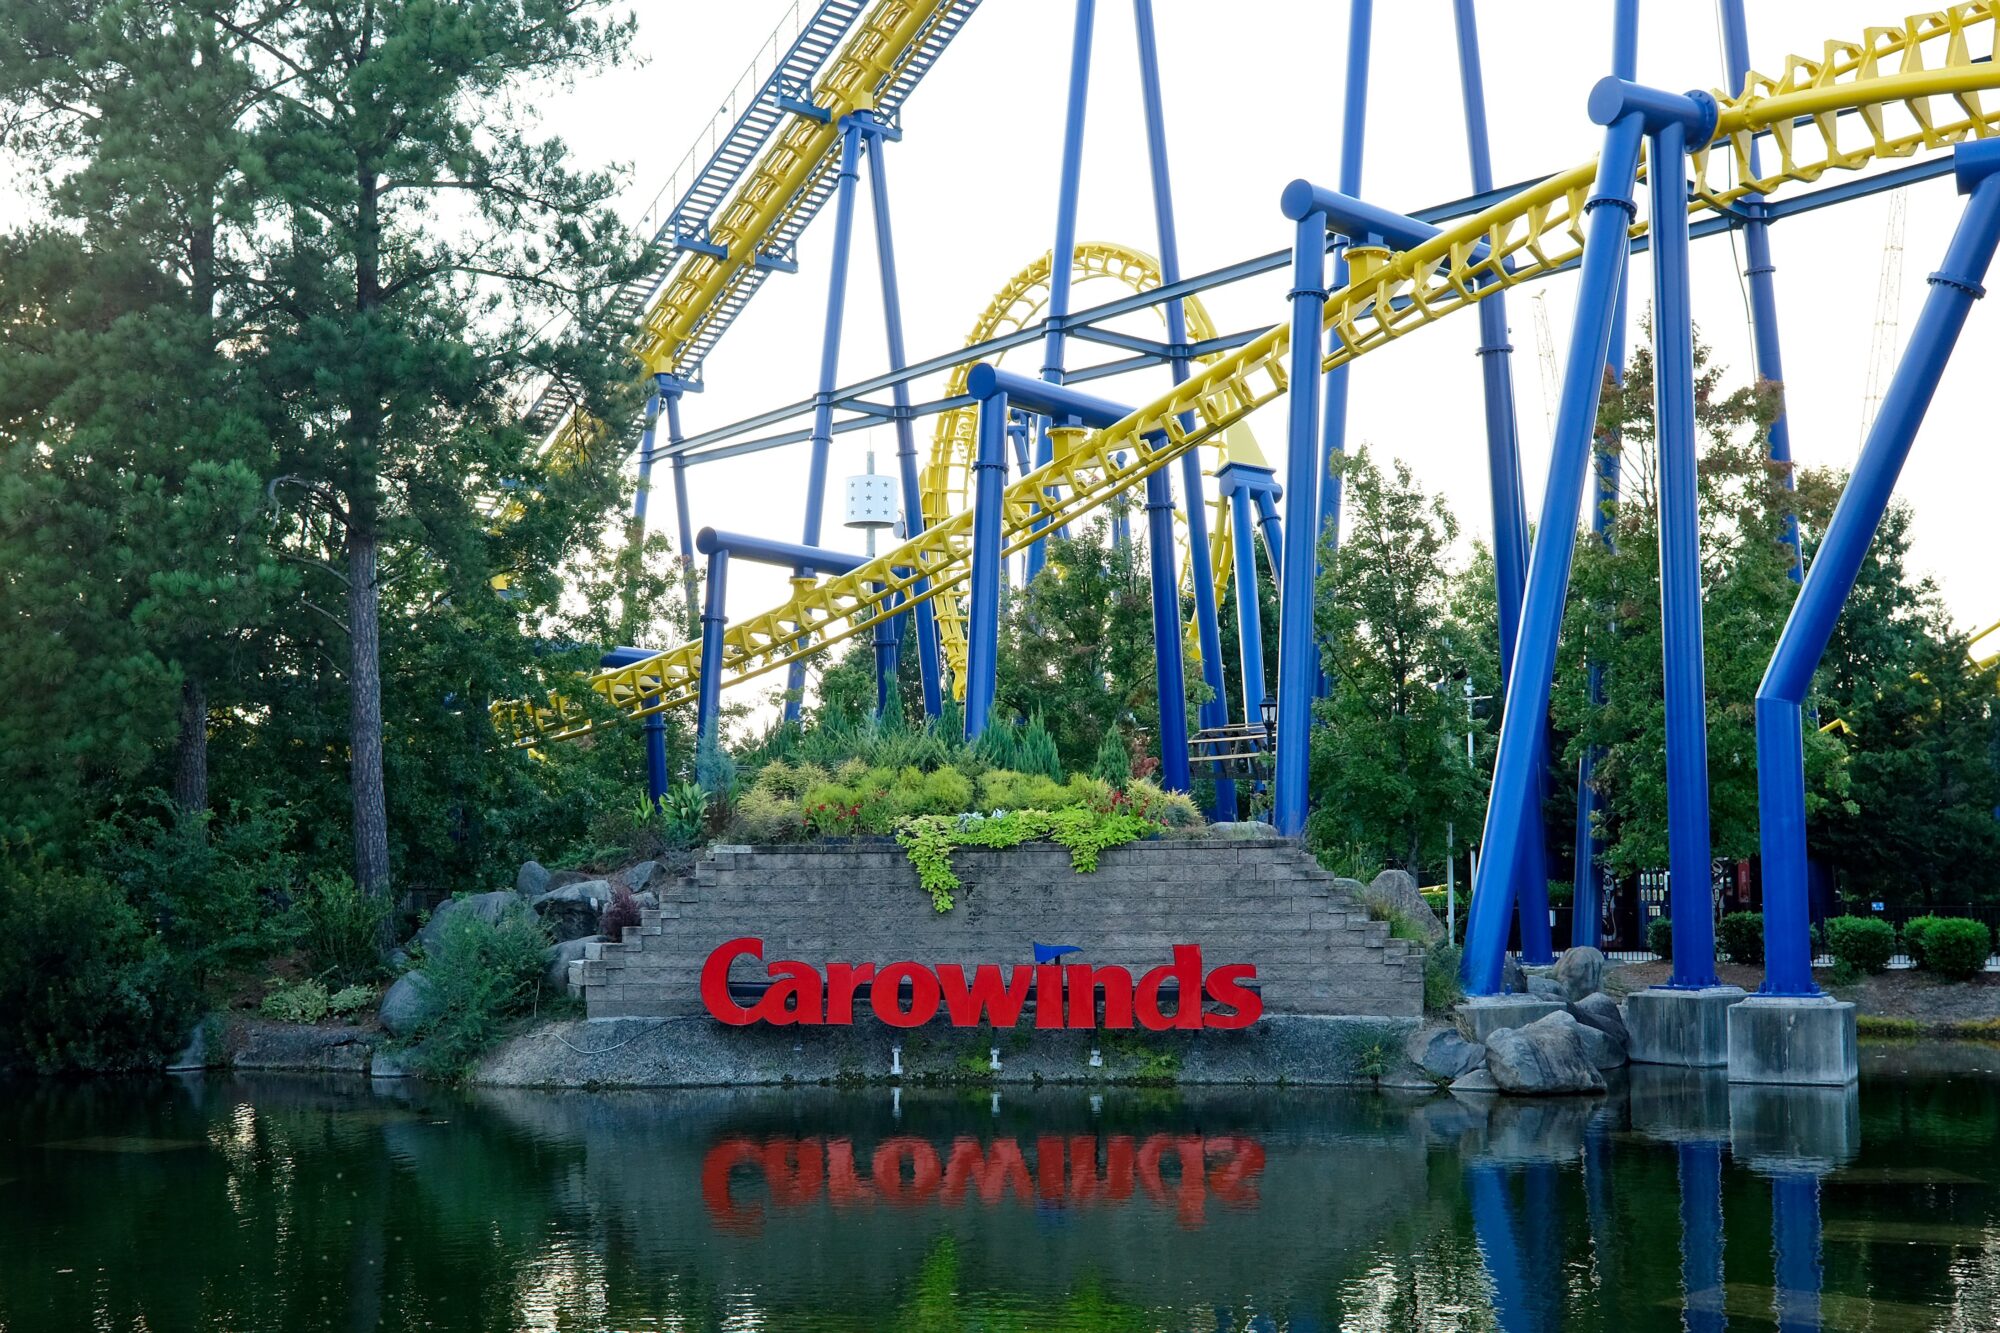 View of Nighthawk at Carowinds